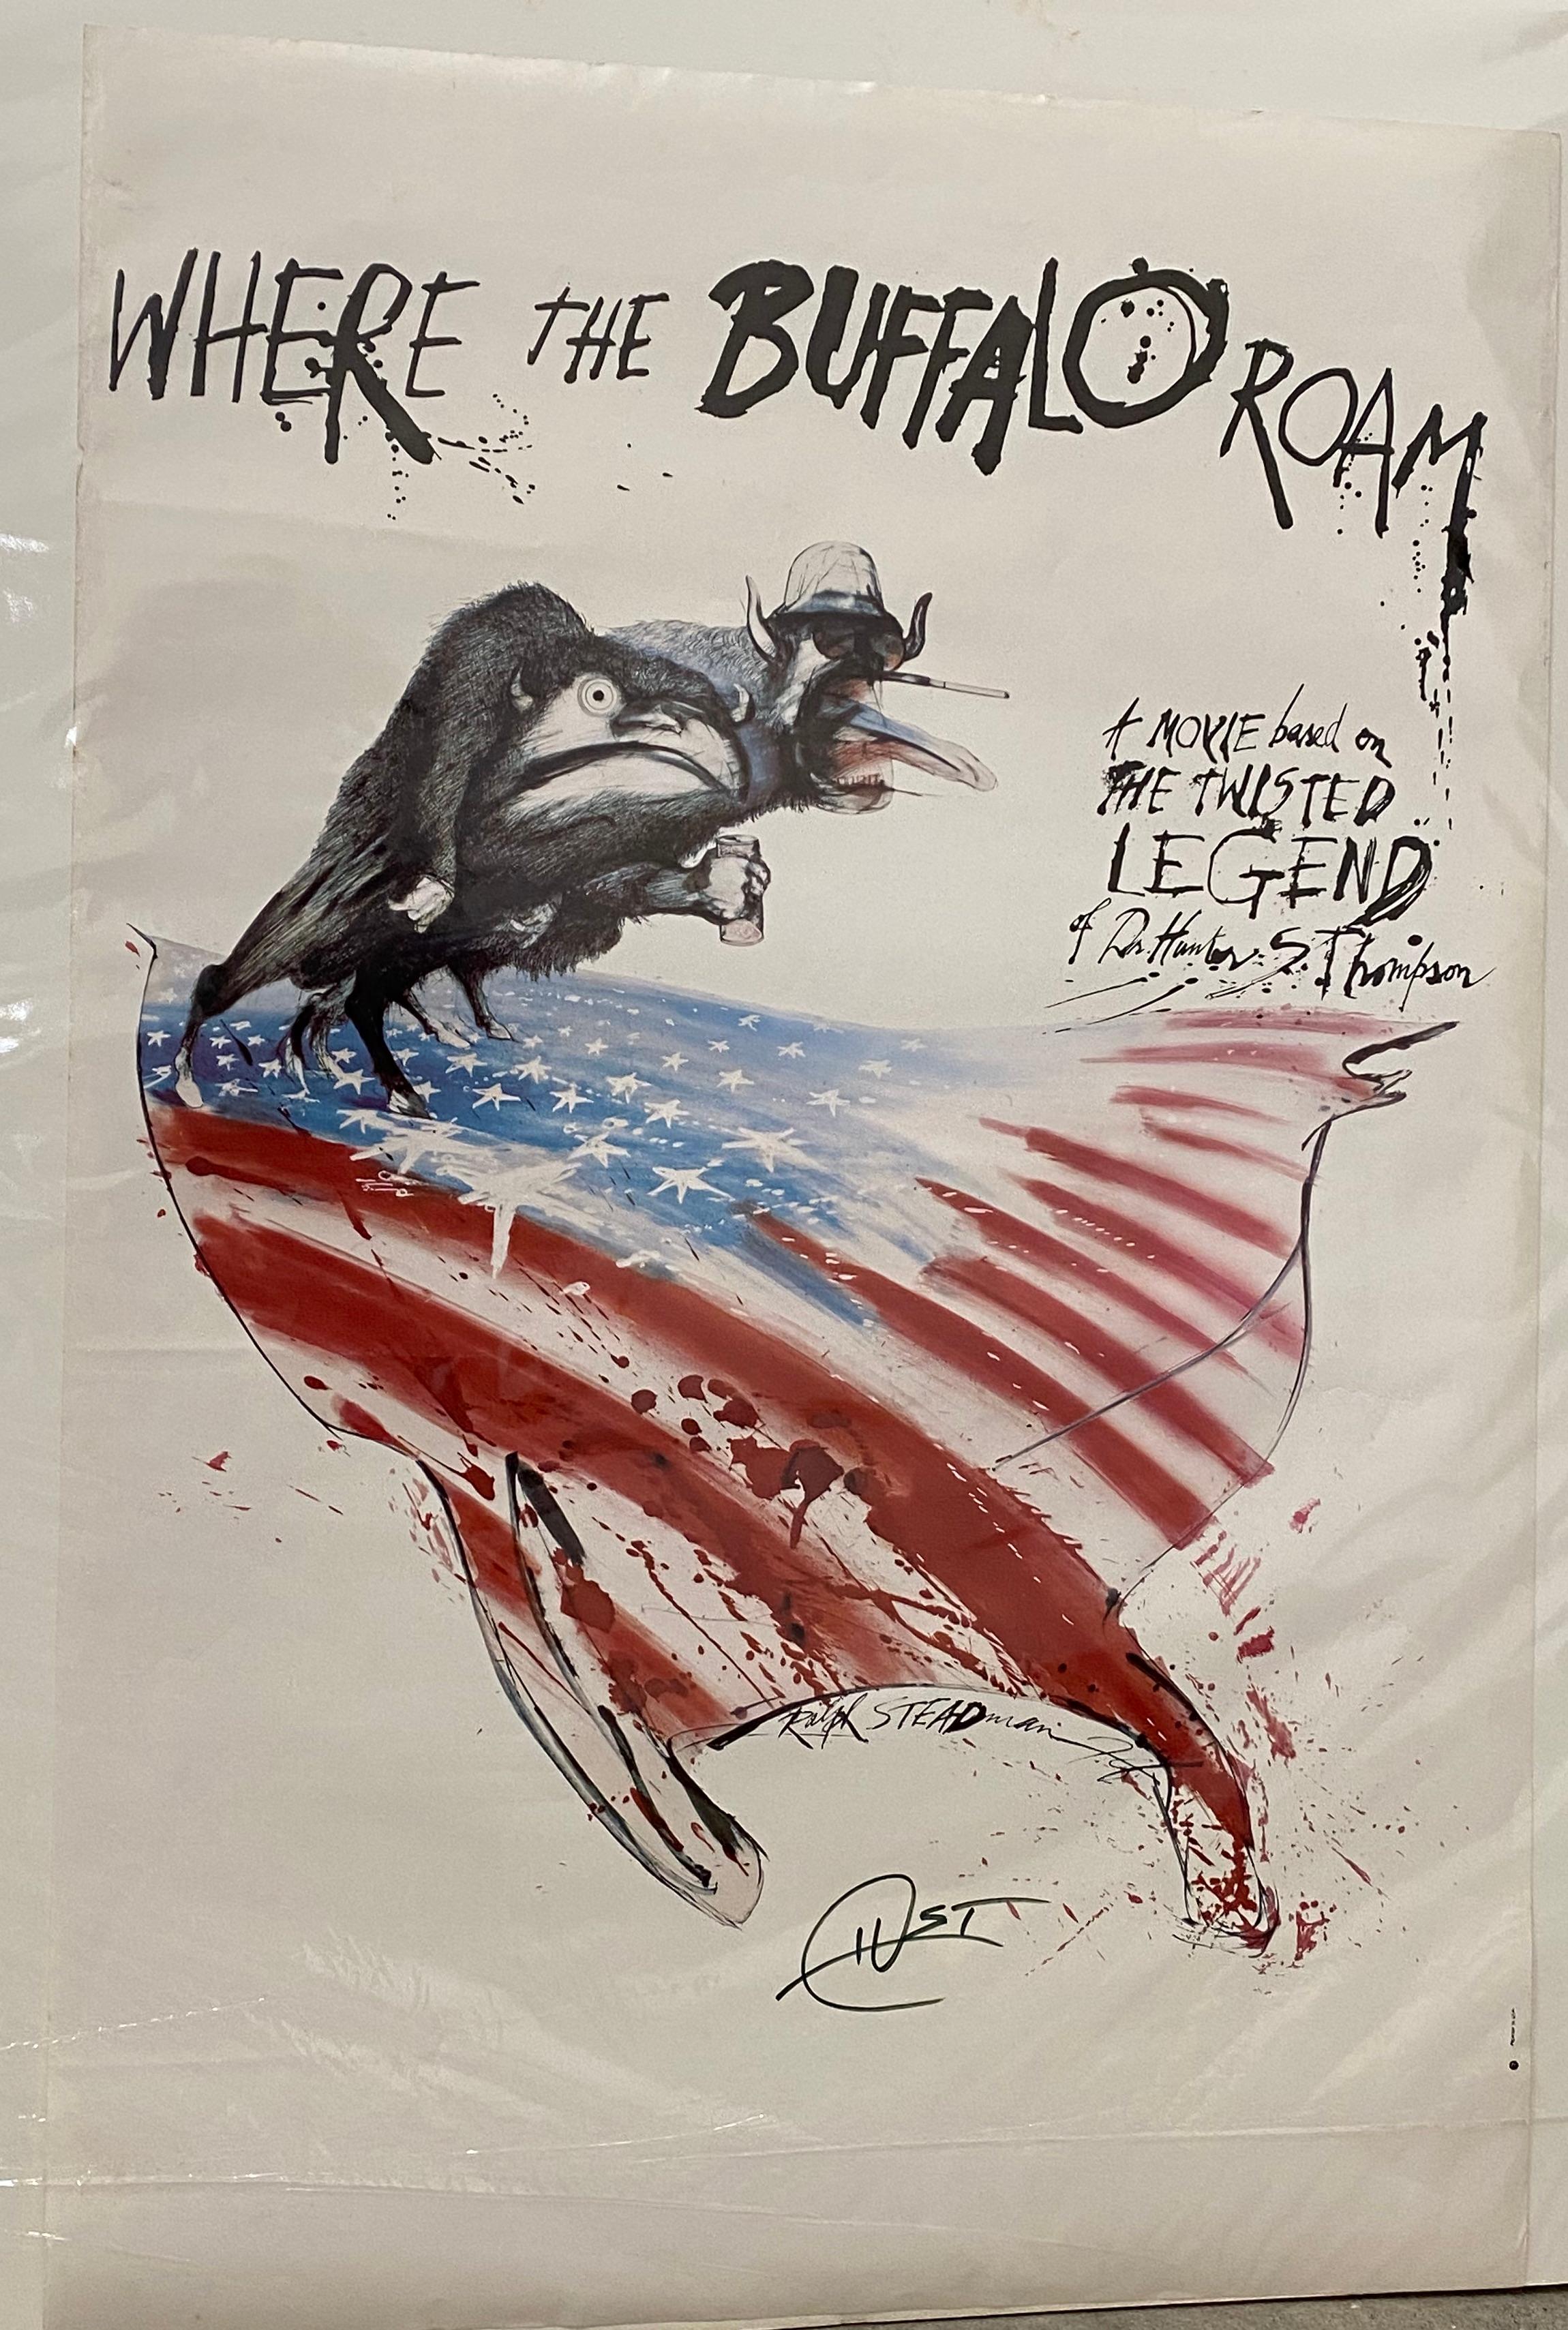 Where The Buffalo Roam Poster Signed by Hunter S. Thompson  - Print by Ralph Steadman